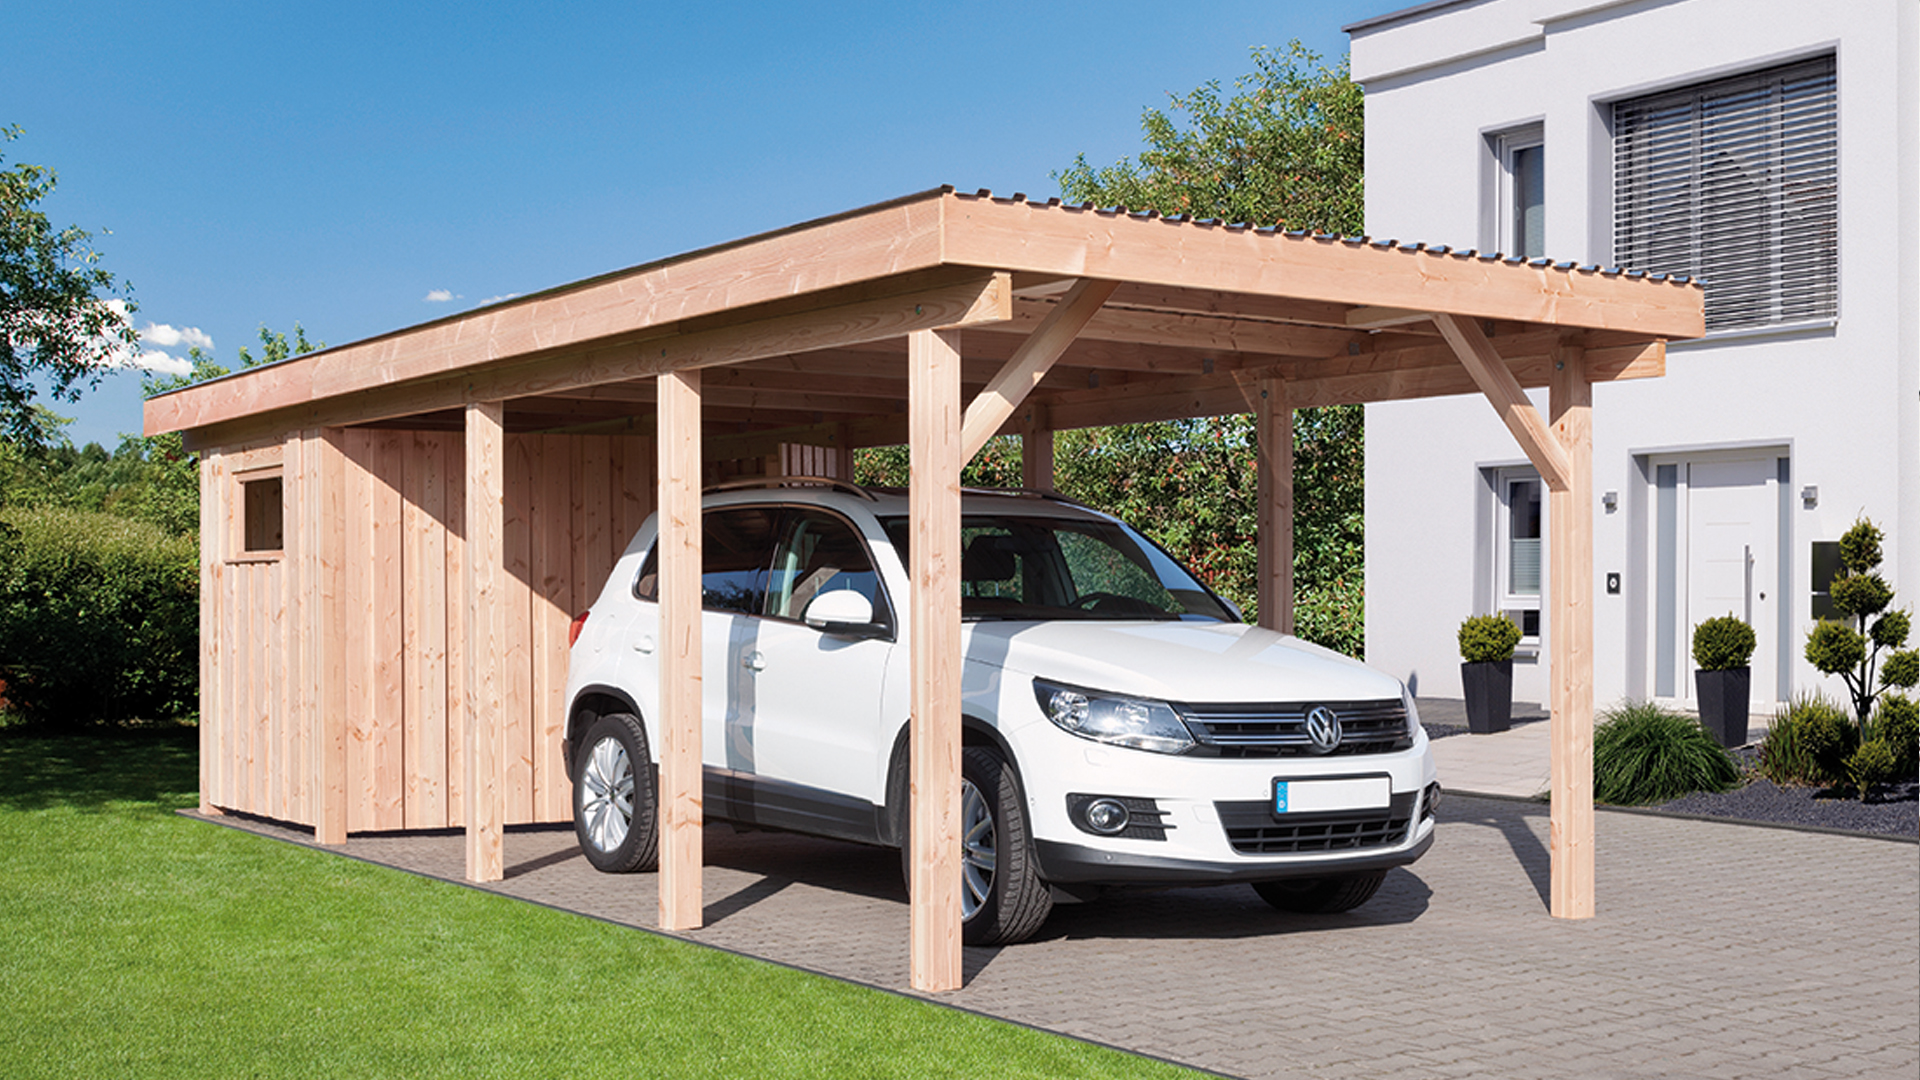 Our steel carports are perfect for protecting one's vehicle investment...